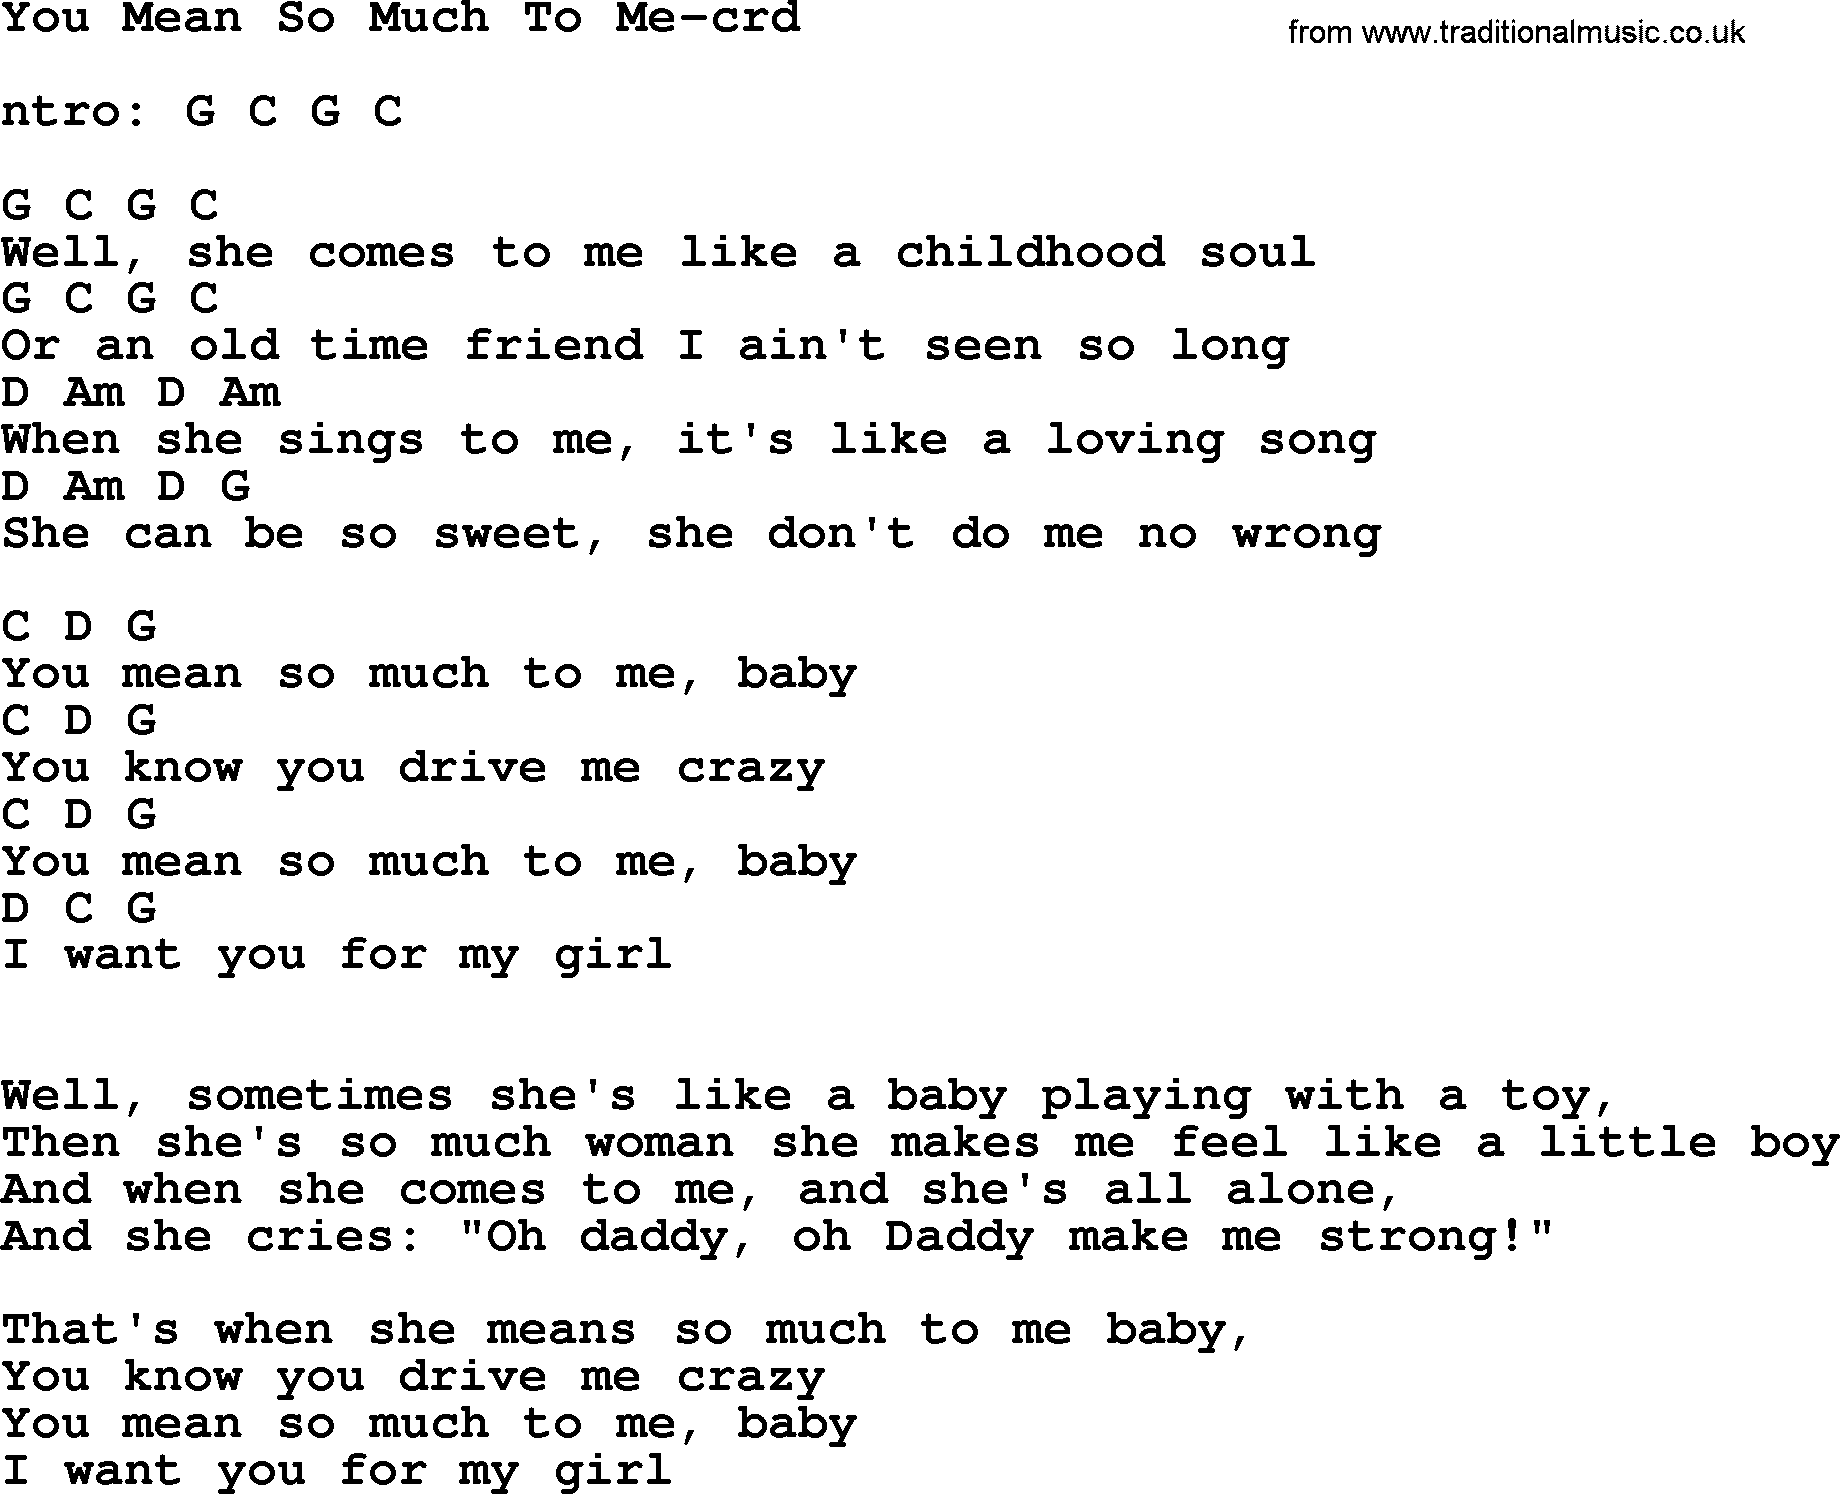 Bruce Springsteen song: You Mean So Much To Me, lyrics and chords